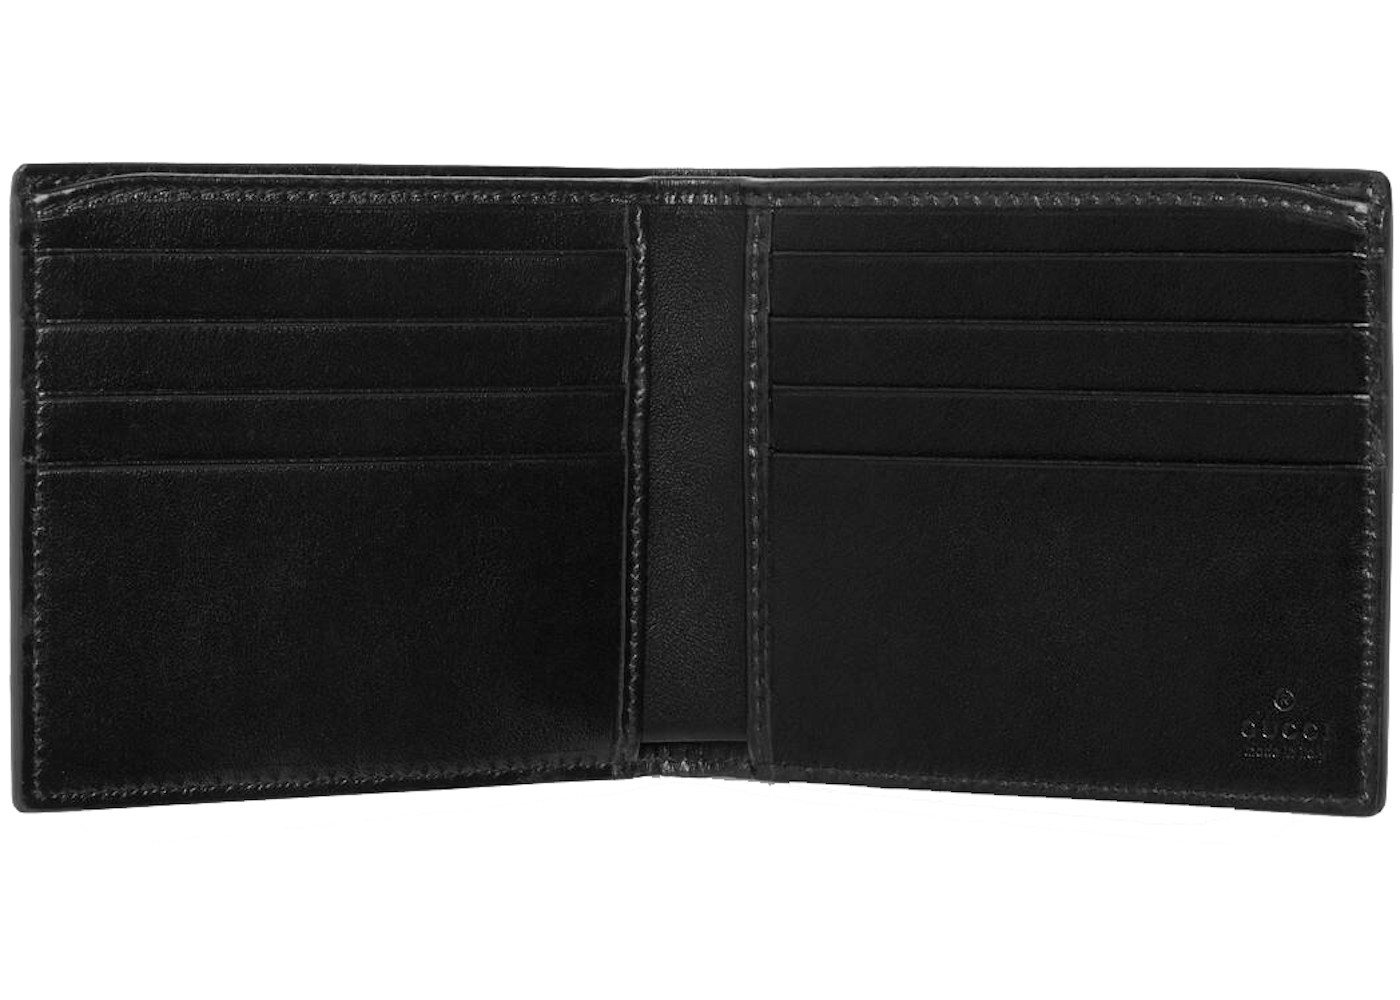 Gucci Leather Wallet with Gucci Logo (8 Card Slot) Black in Calfskin ...